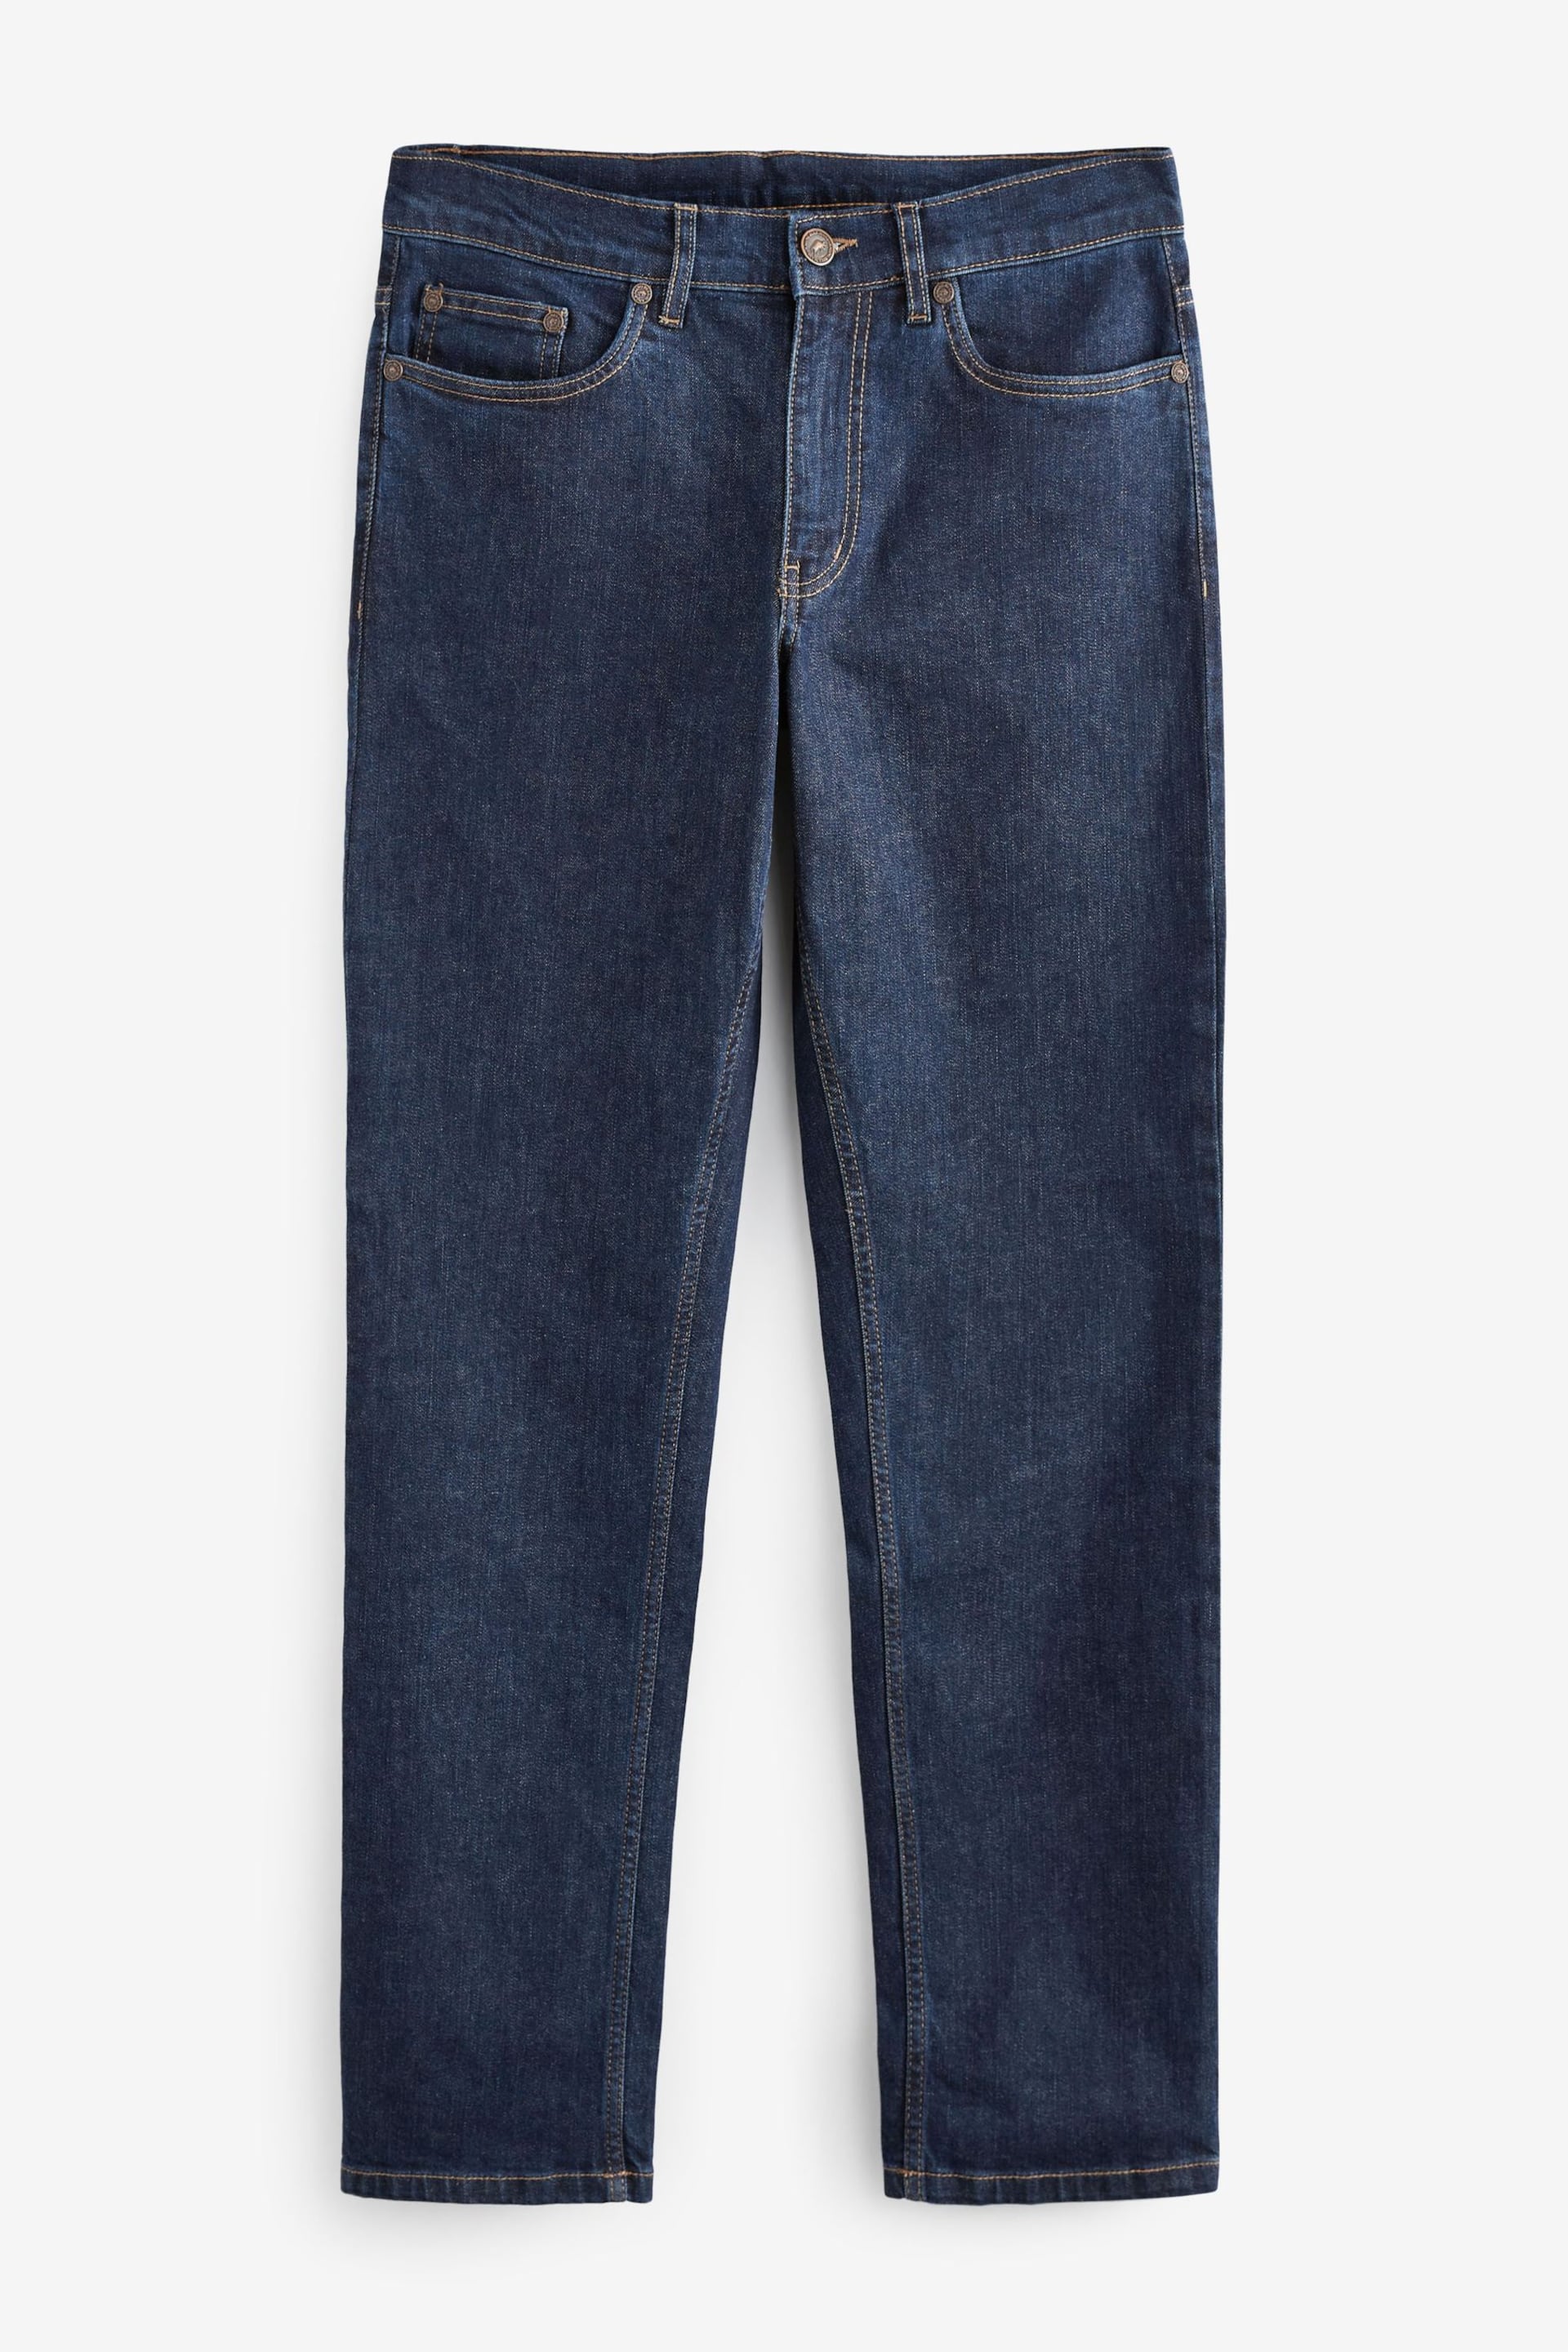 Raging Bull Blue Tapered Jeans - Image 6 of 6